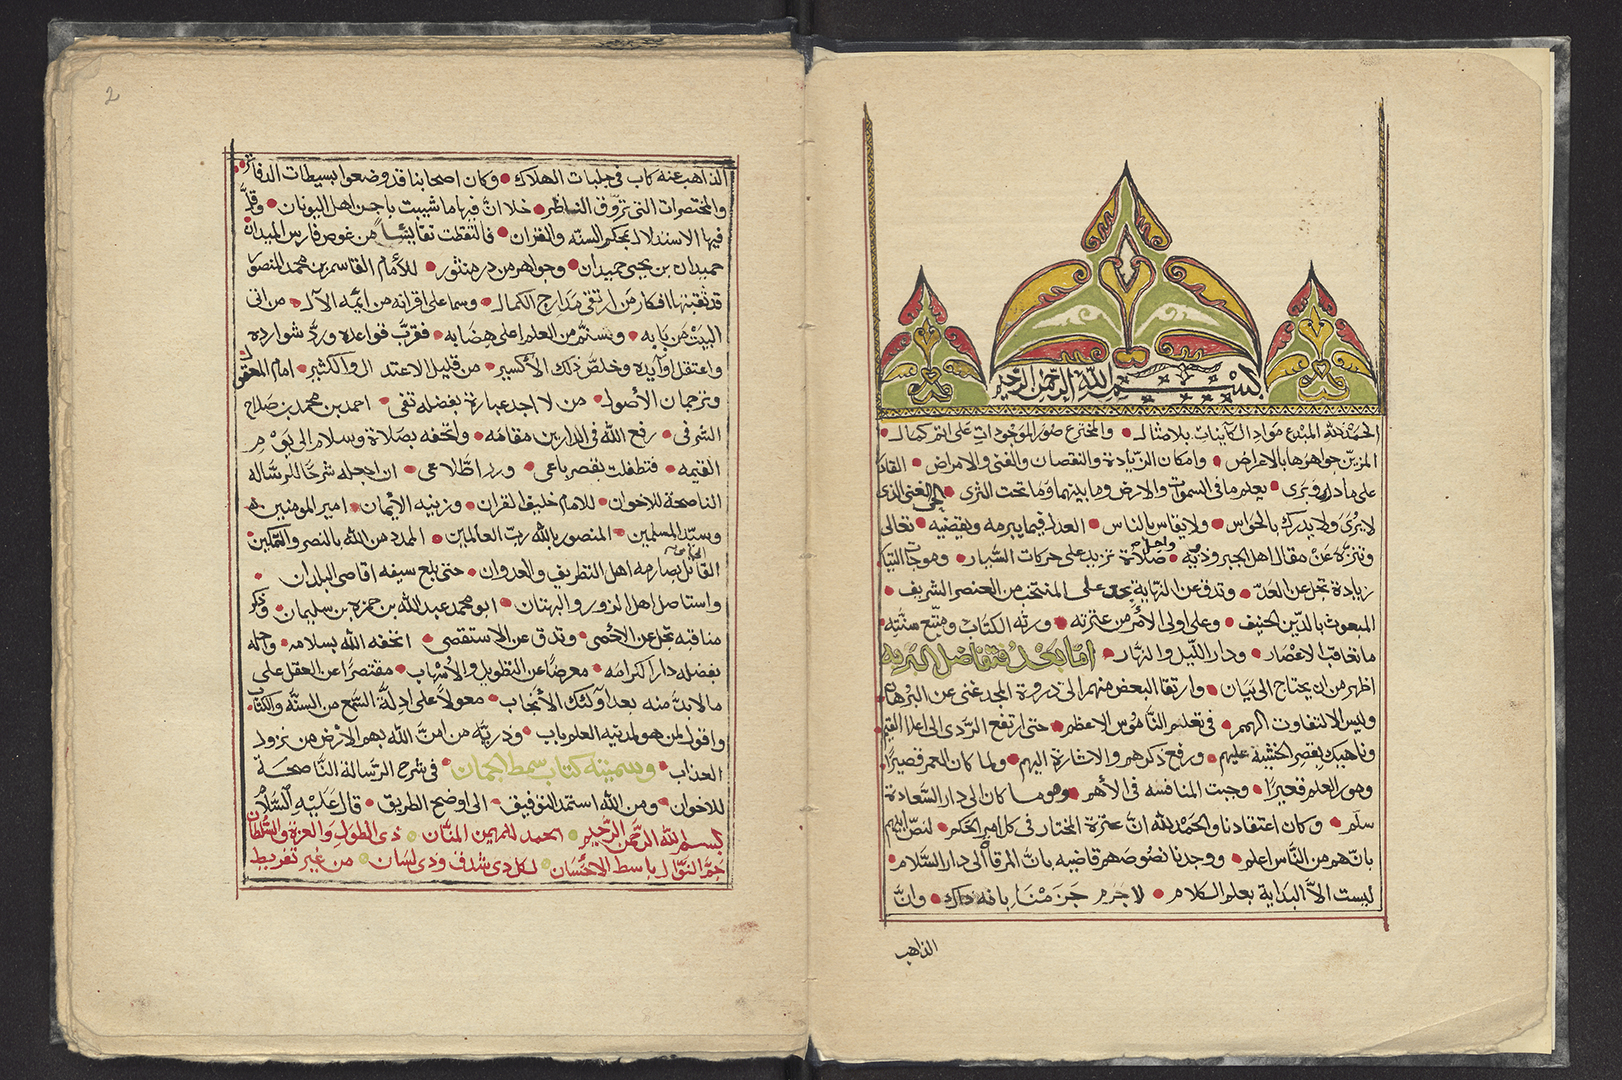 Digitised Leiden Middle Eastern collections available in Digital Collections - Leiden University